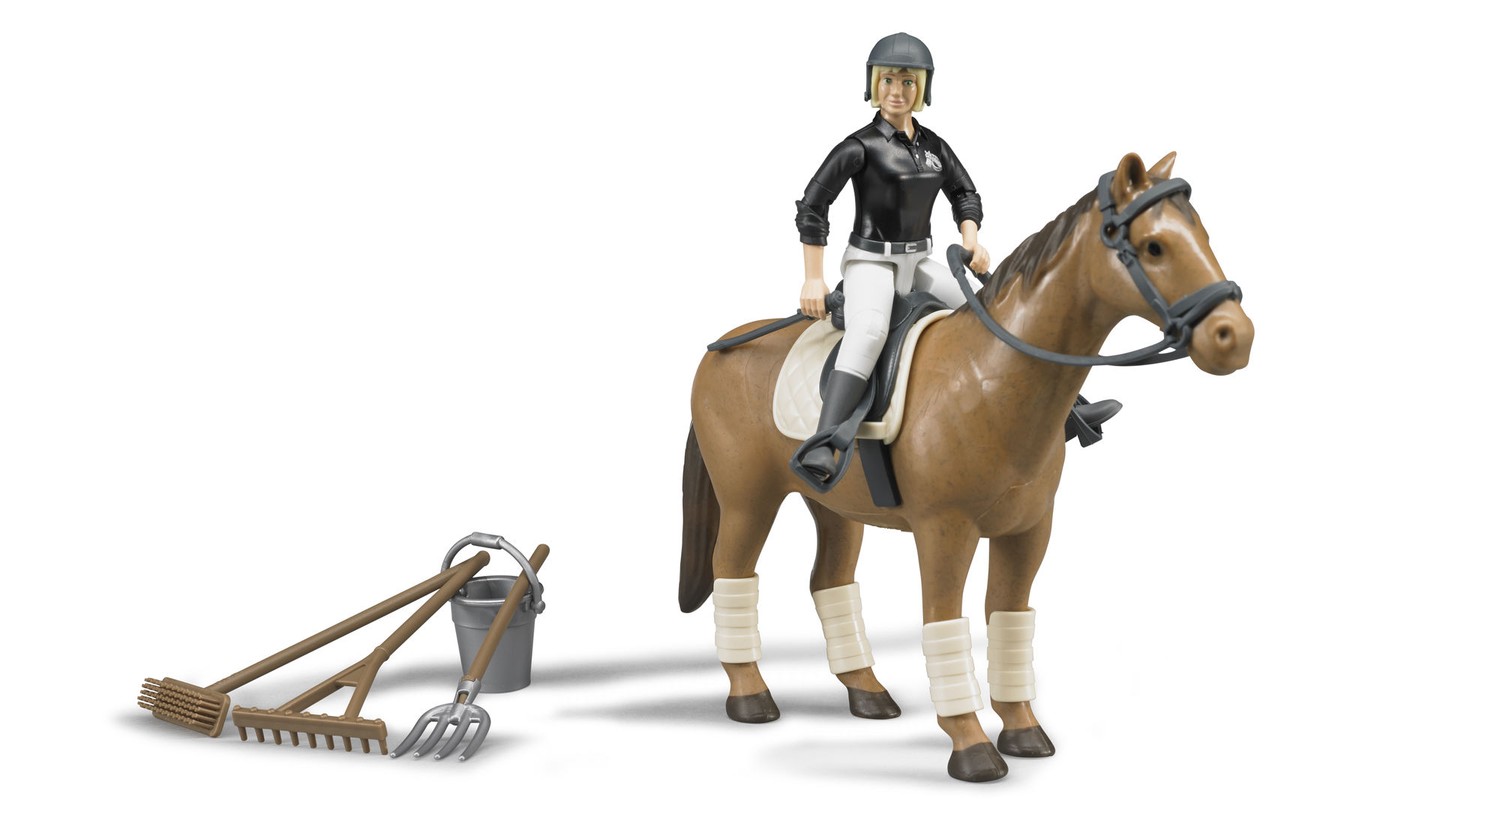 Bruder Horse Equestrian Set 1:16 Scale Toy 0625 